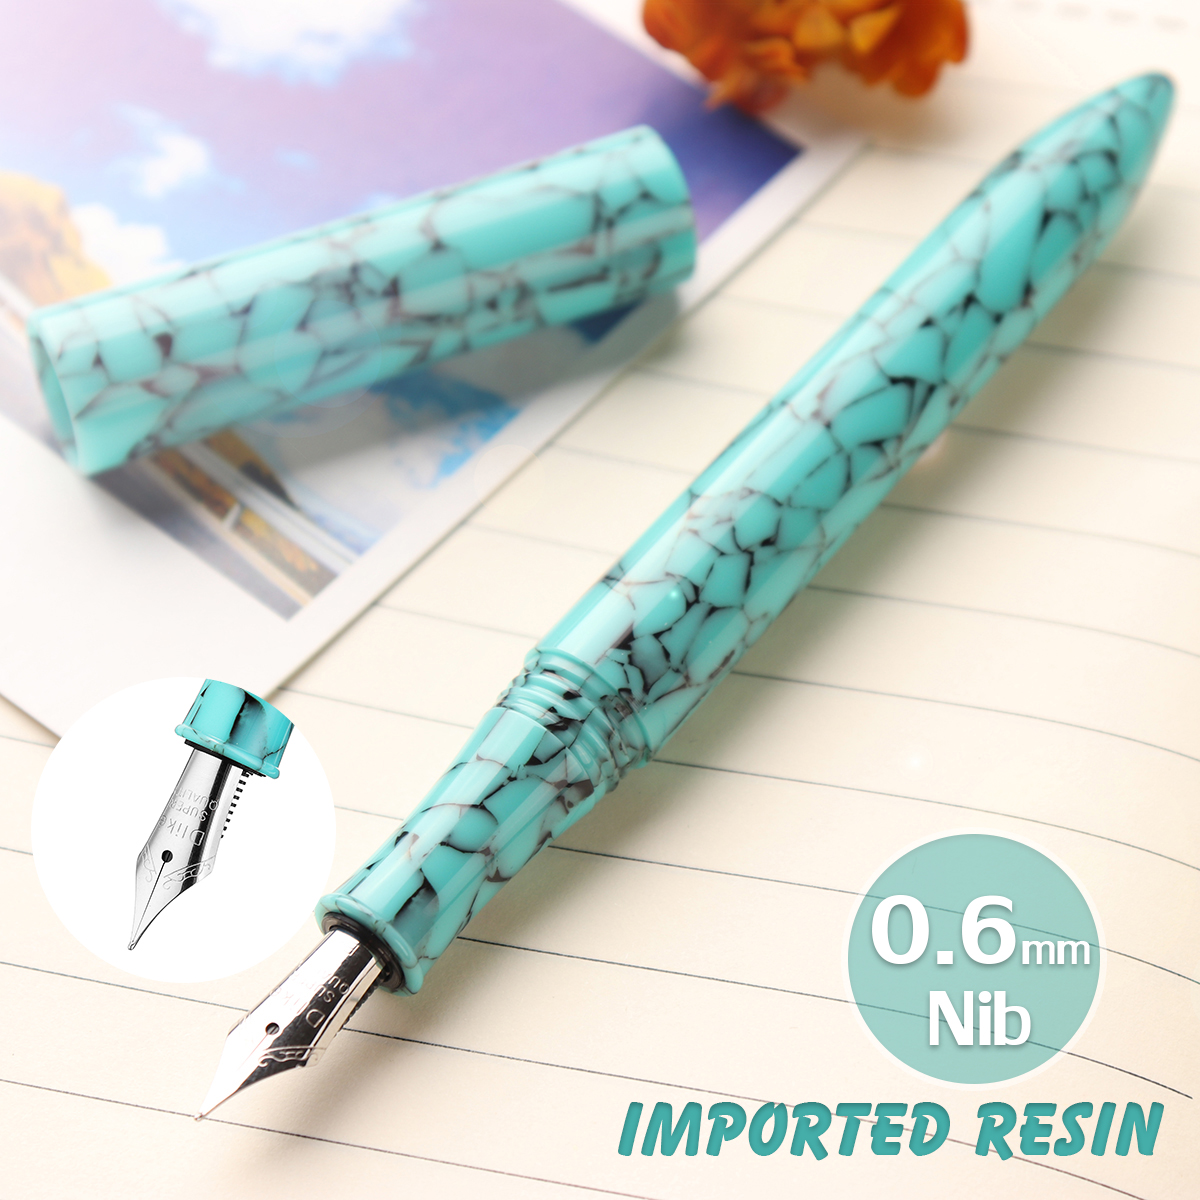 Delike-06mm-Nib-Resin-Fountain-Pen-Rotating-Ink-Calligraphy-Writing-With-Box-For-Office-School-1303281-4